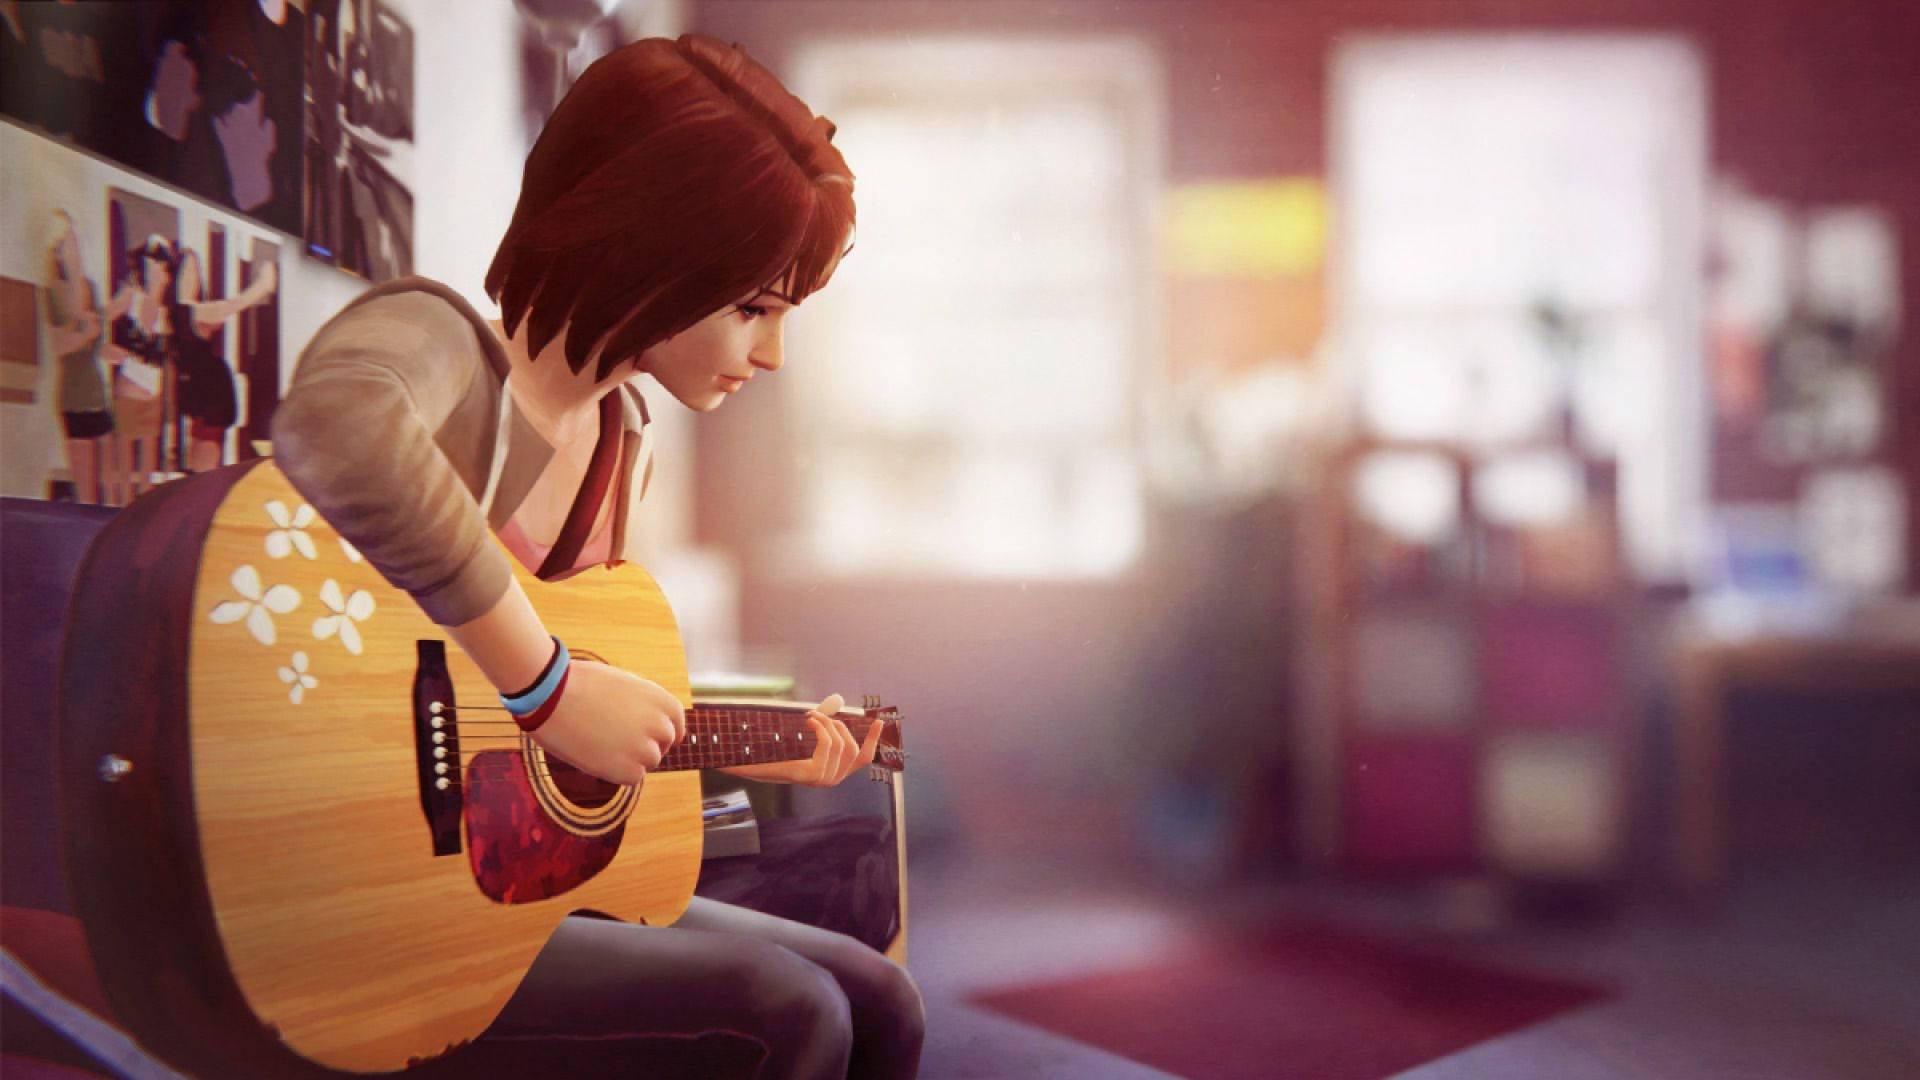 Max Caulfield playing a guitar in her dorm room in 'Life Is Strange'